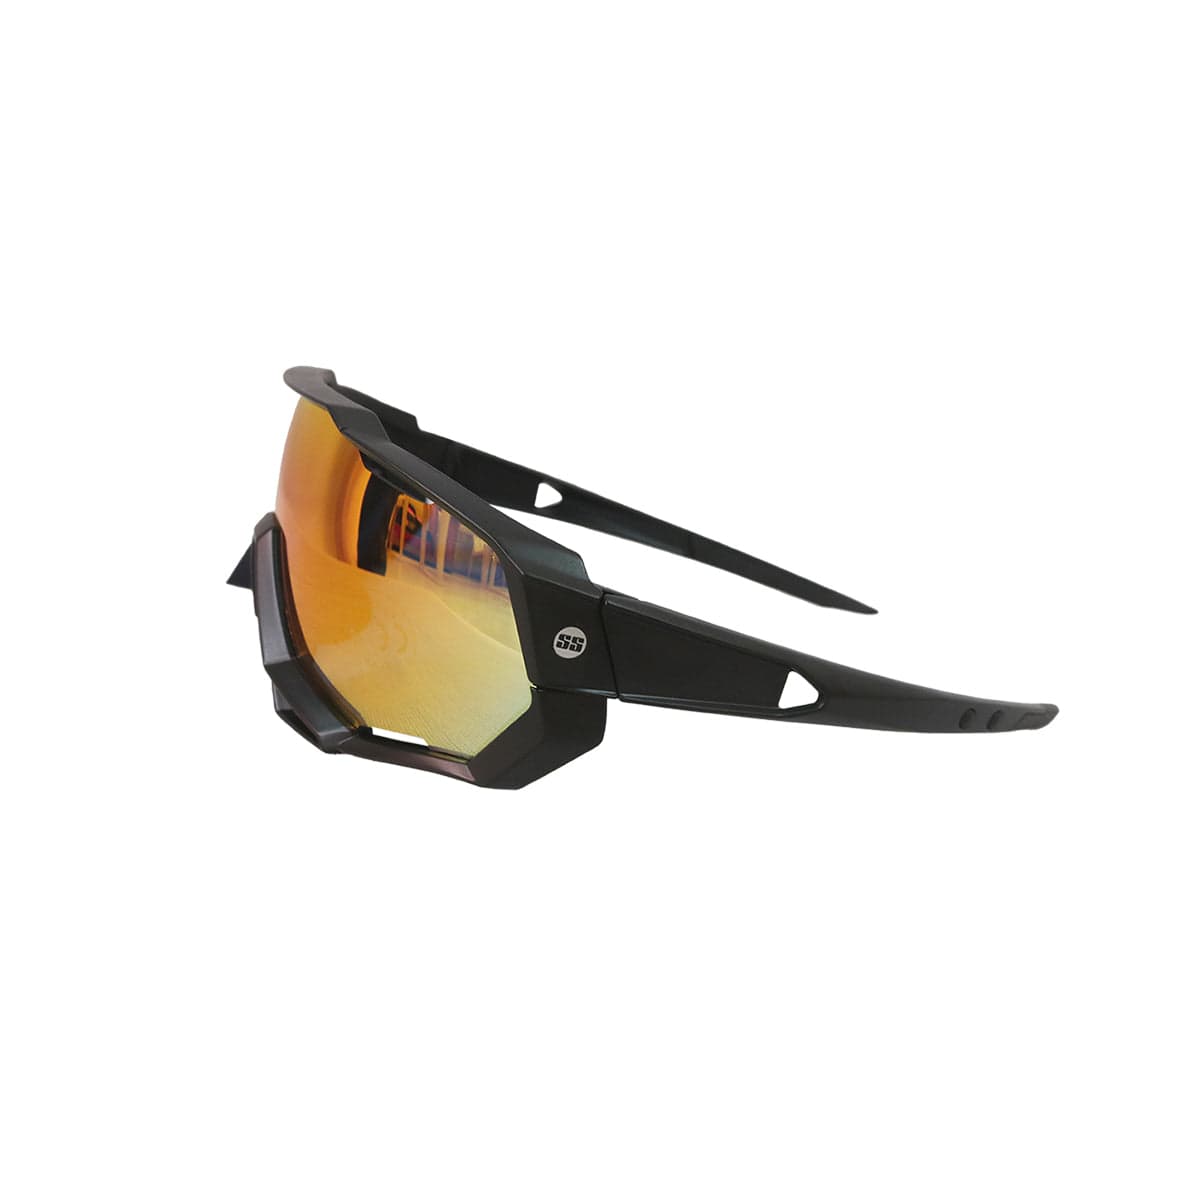 SS Accessories SS Sunglasses Legacy Pro